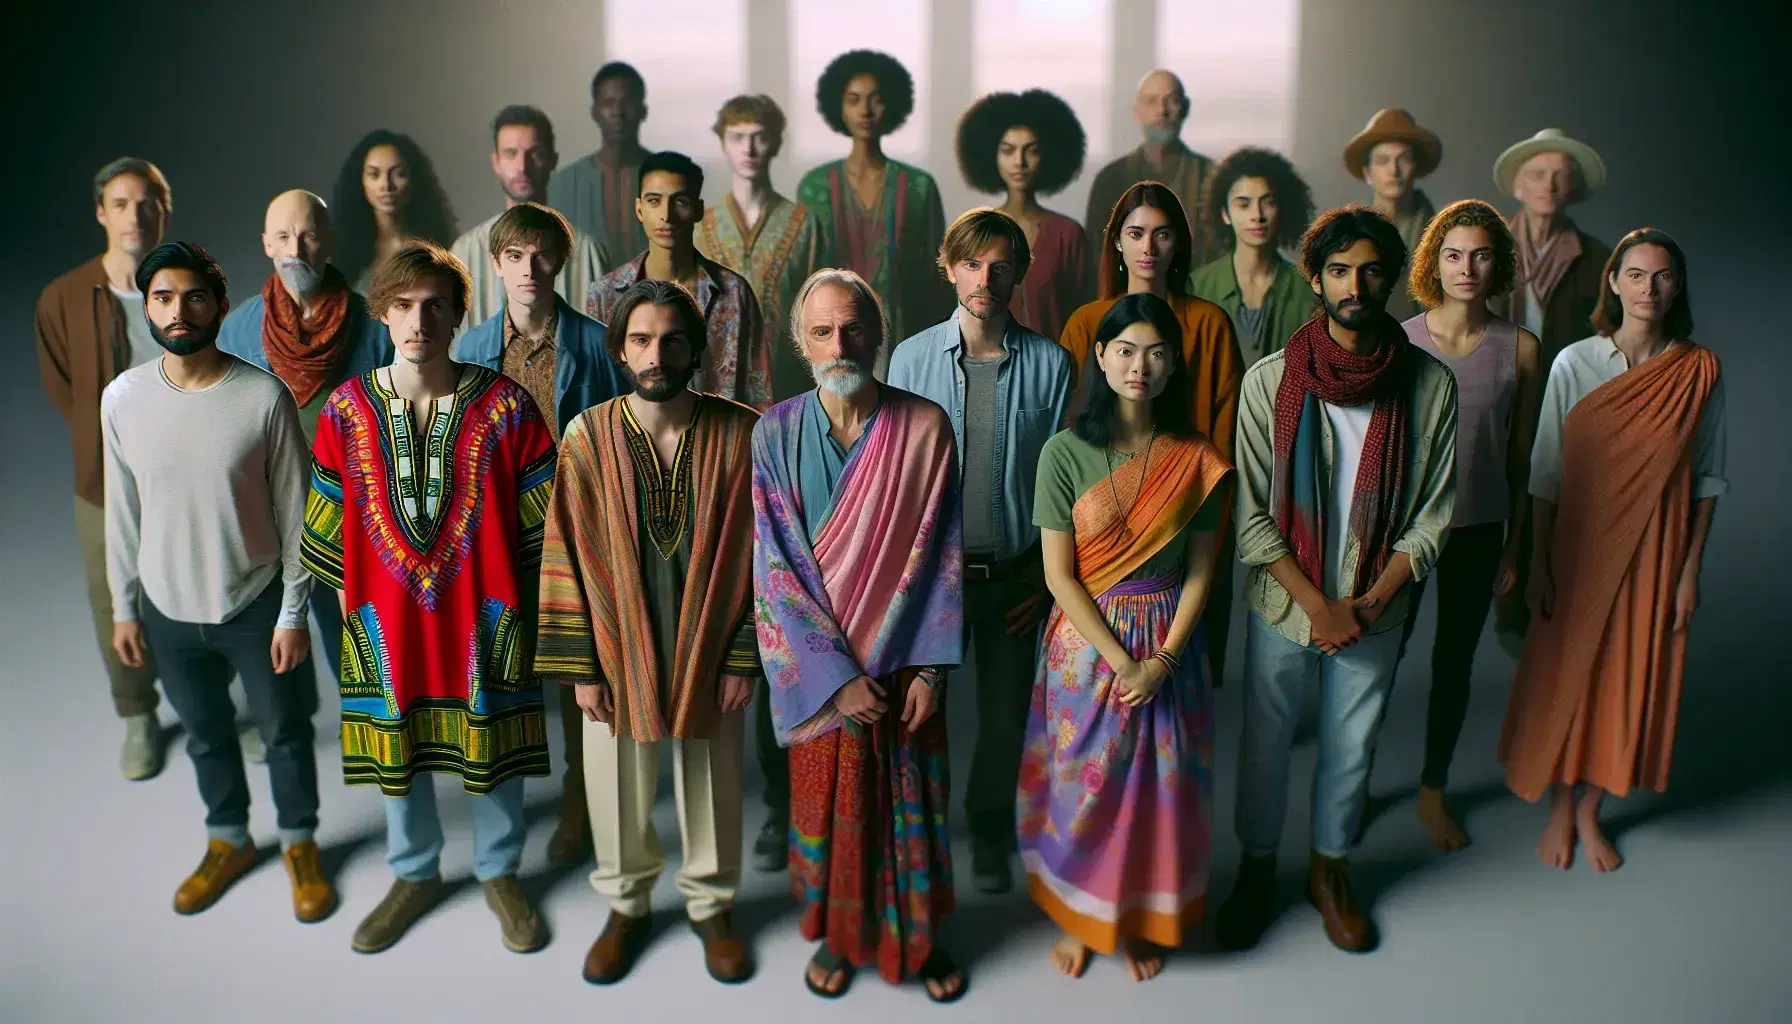 Multi-ethnic group of people in traditional and modern clothing forms a semi-circle, expressing cultural unity and diversity.